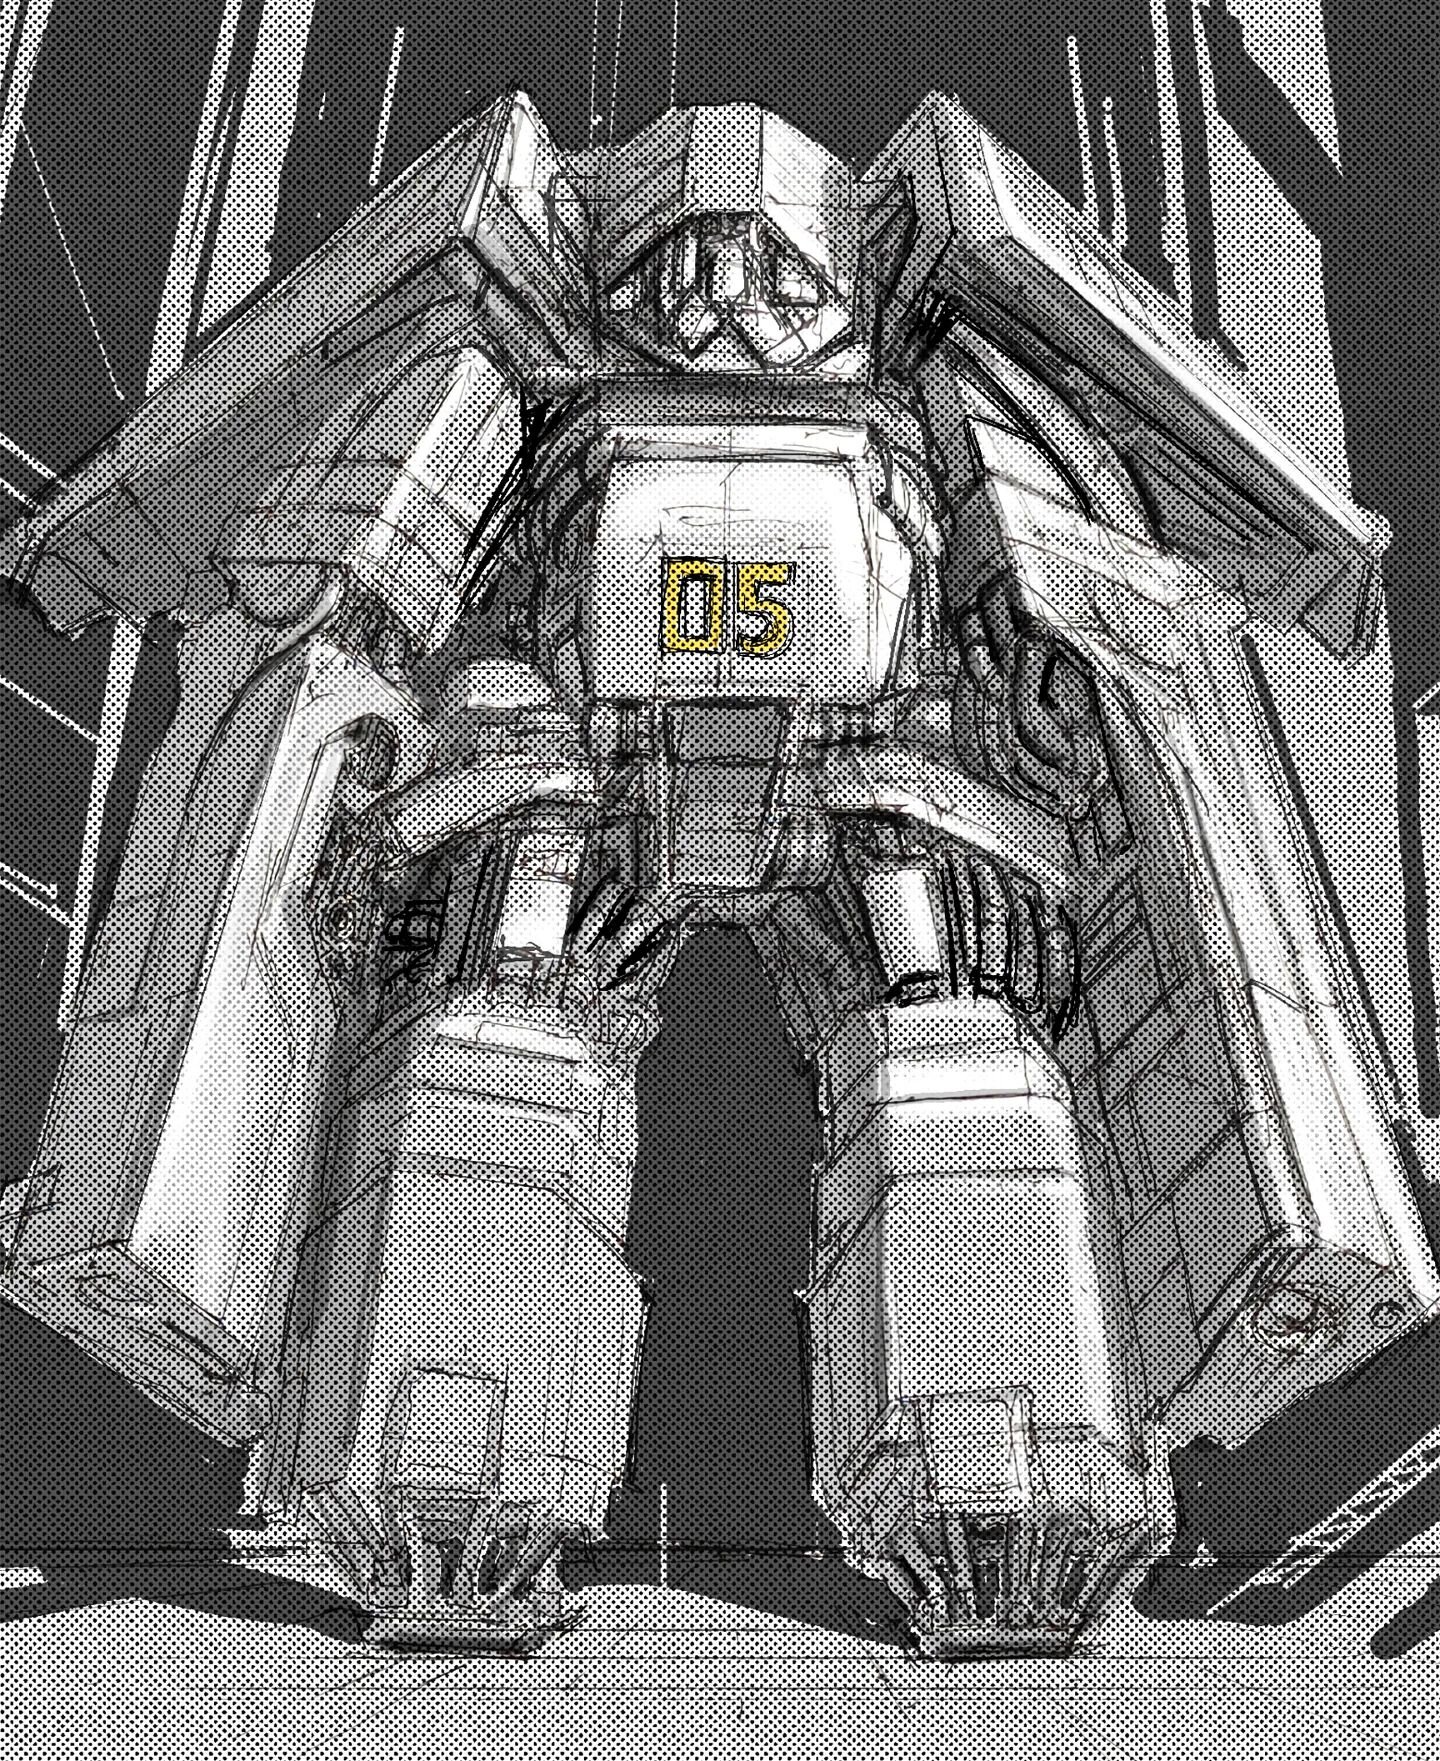 Day 5, adjusted the crop a bit - the screen tones make for a tough read on mobile screens. Let's keep the #marchofrobots going!

#conceptart #conceptartwork #conceptsketch #igdesign #artist #industrialdesign #doodle #sketch #idsketching #scifi #scifi